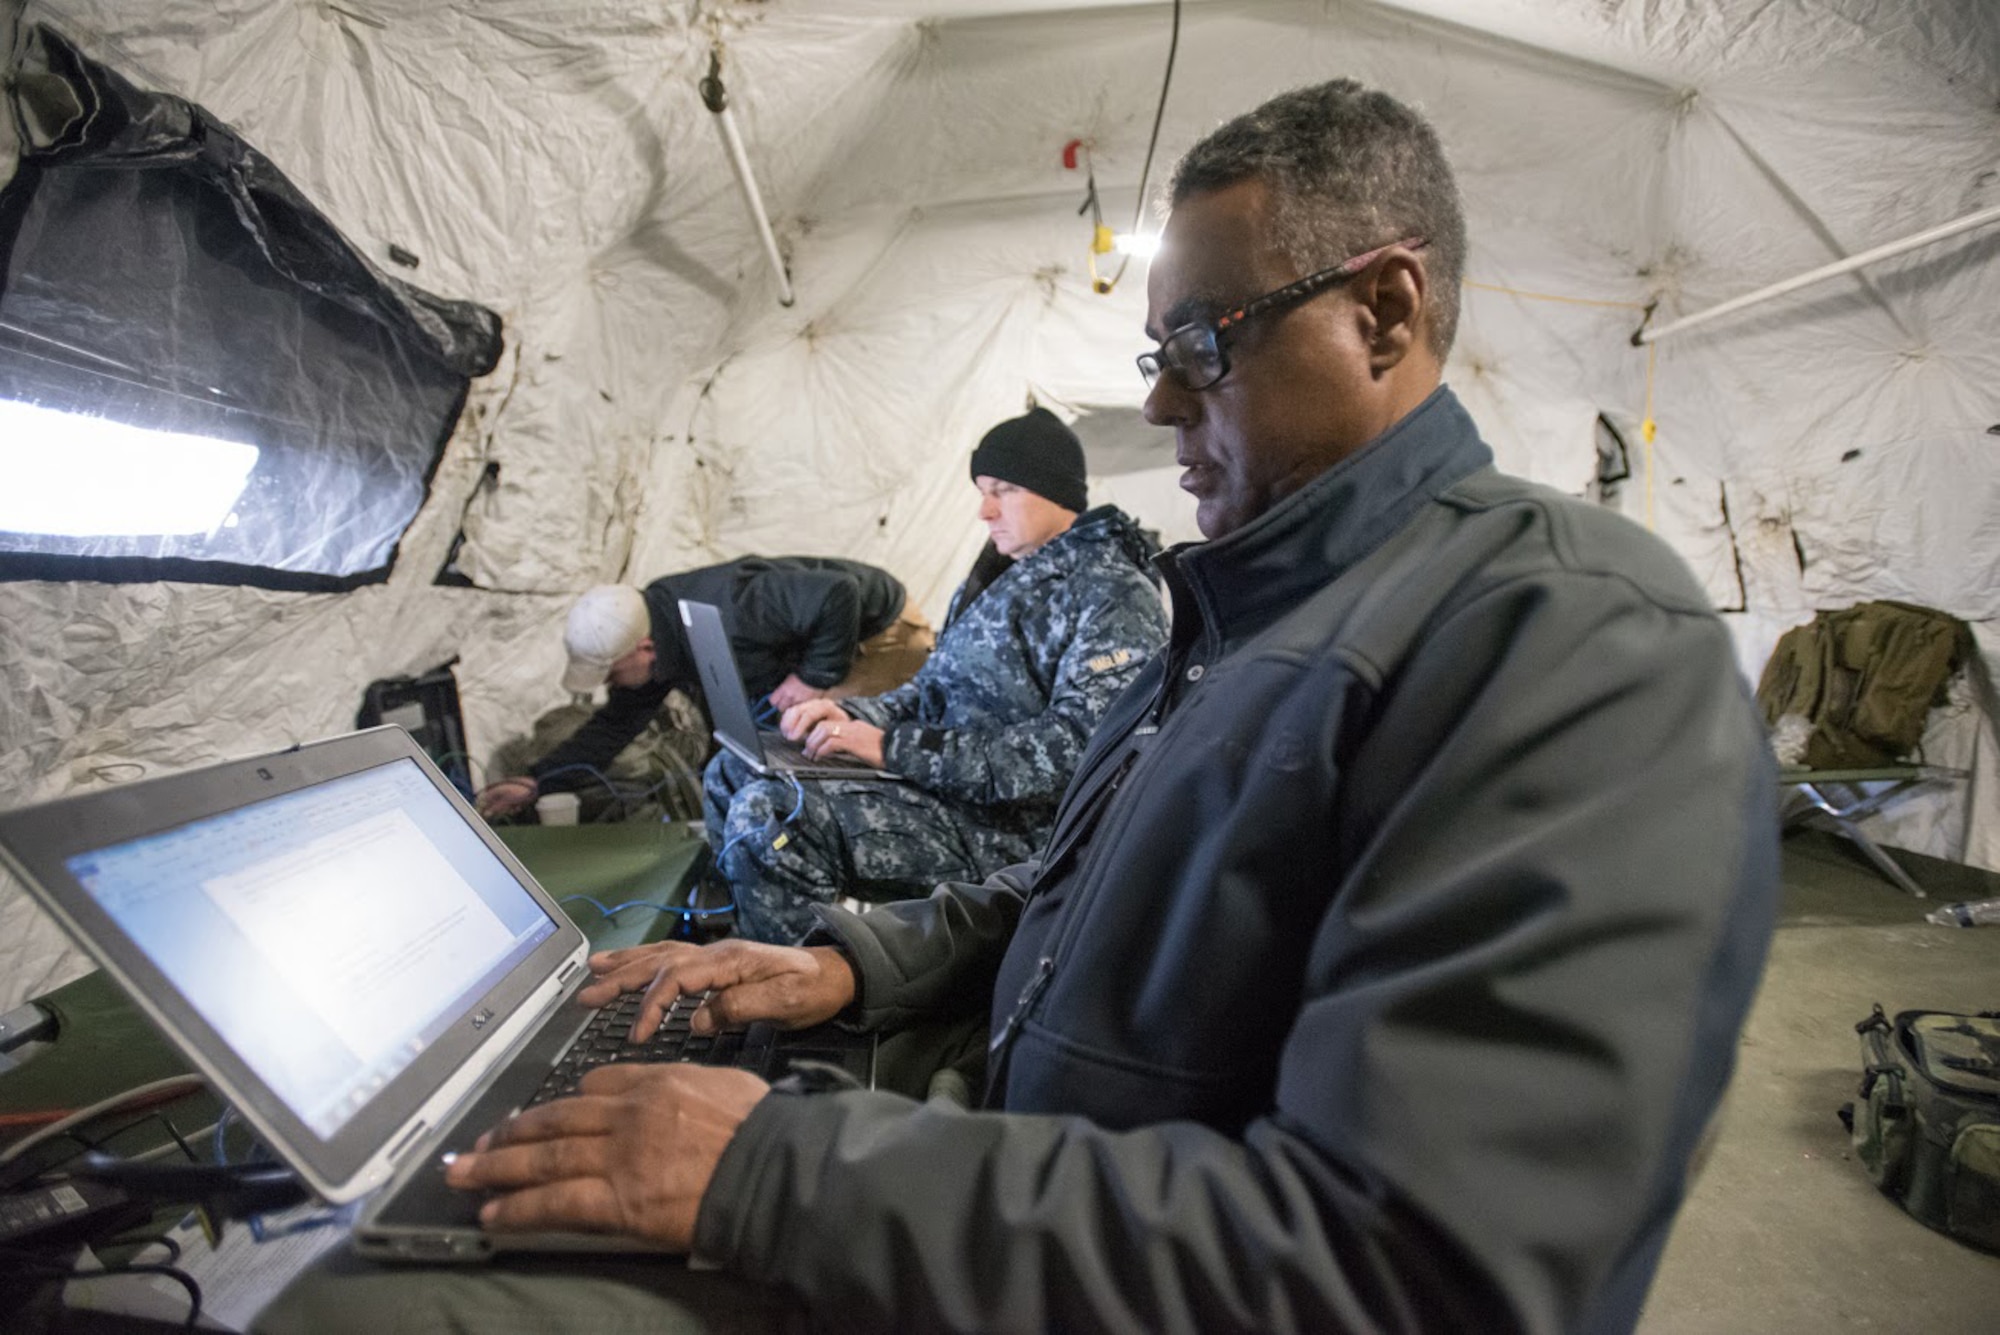 Facial Liban (right), a traffic management specialist for the Defense Logistics Agency's Support Team Black, and Capt. Paul Haslam, Black Team commander, prepare operational reports at Amedee Army Airfield, Calif., on March 7, 2016. The Defense Logistics Agency is working in conjunction with the Kentucky Air National Guard’s 123rd Contingency Response Group and the U.S. Army’s 688th Rapid Port Opening Element to operate Joint Task Force-Port Opening Sangala during a week-long exercise called Operation Lumberjack. The objective of the JTF-PO is to establish an aerial port of debarkation, provide initial distribution capability and set up warehousing for distribution beyond a forward node. (Kentucky Air National Guard photo by Master Sgt. Phil Speck)